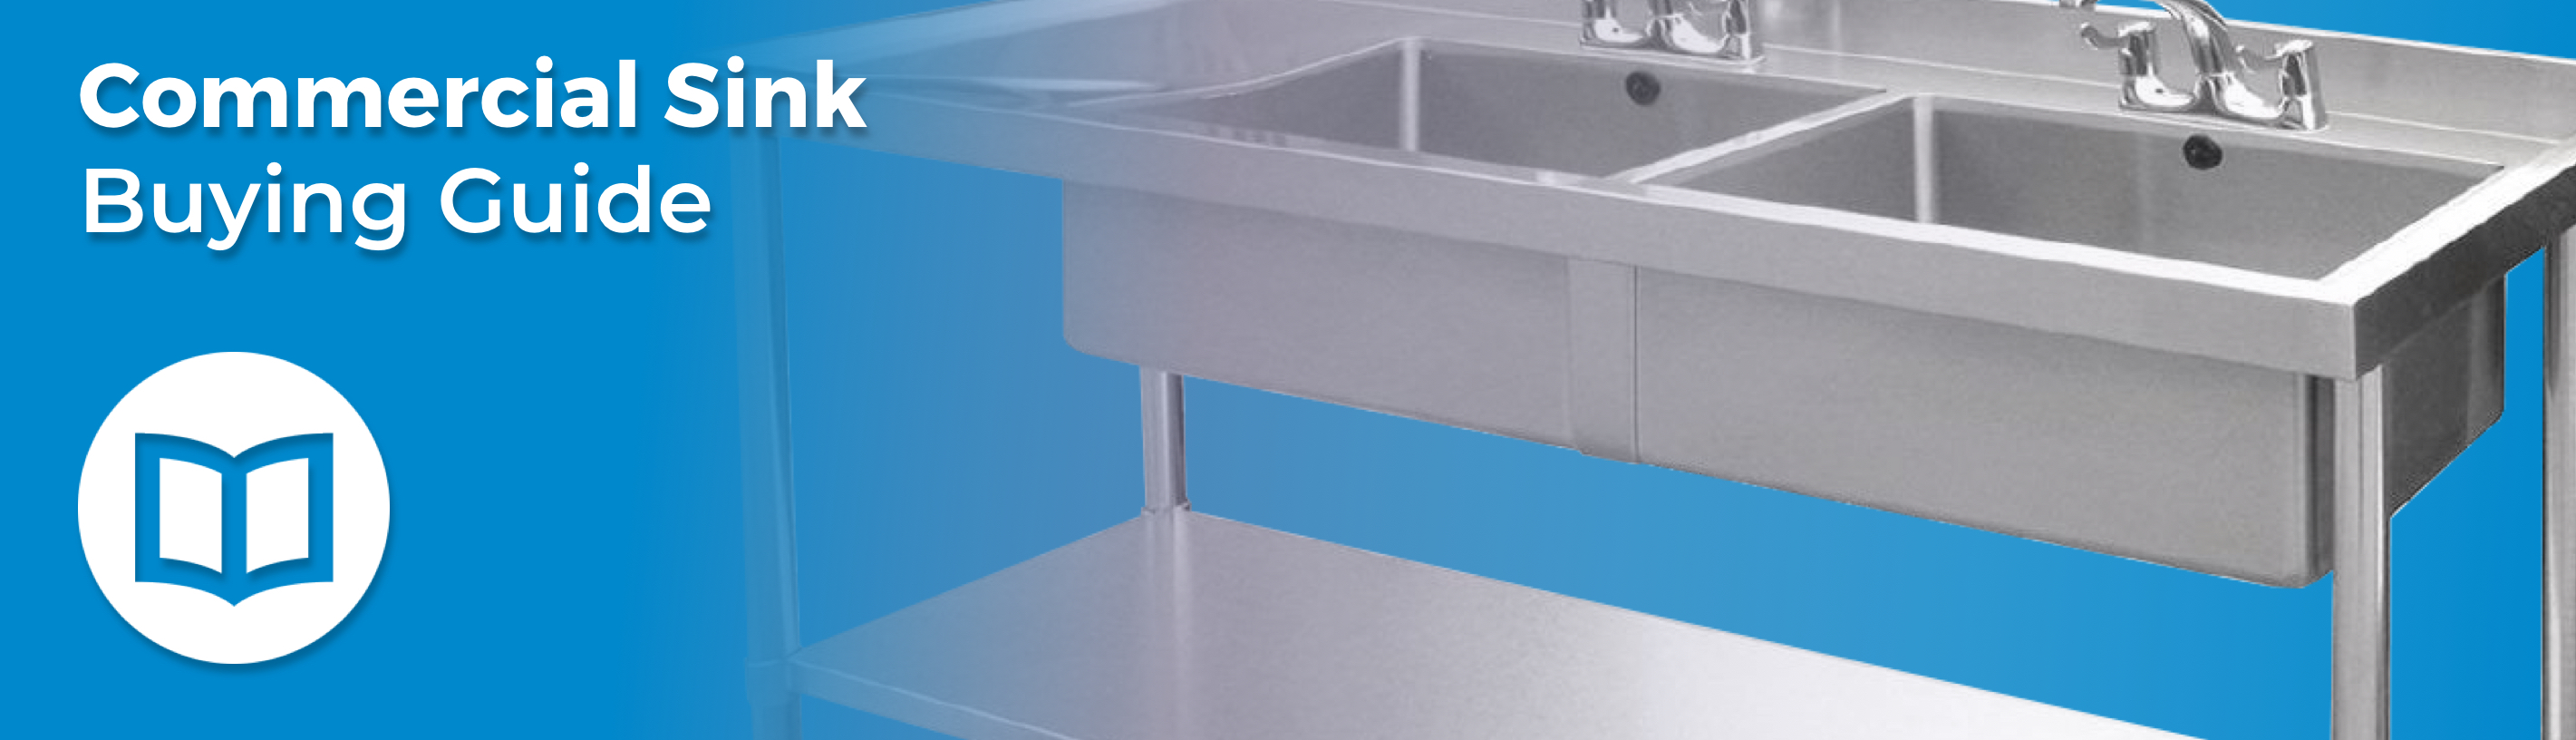 Commercial Sink Buying Guide